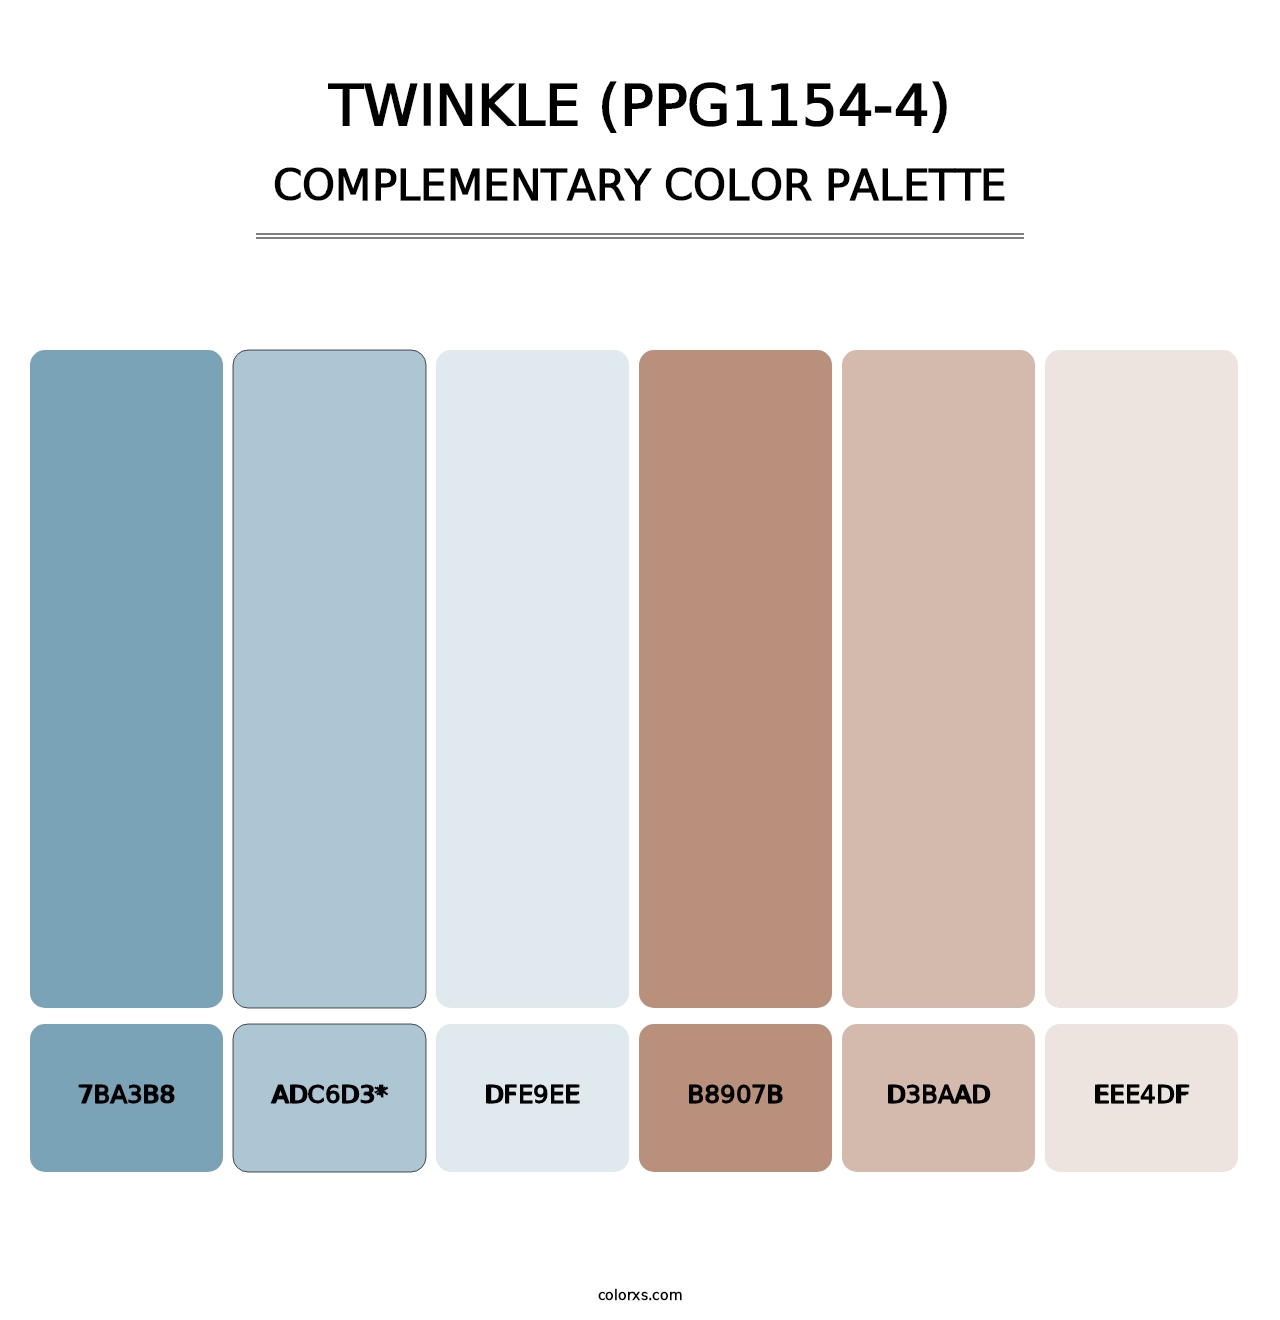 Twinkle (PPG1154-4) - Complementary Color Palette